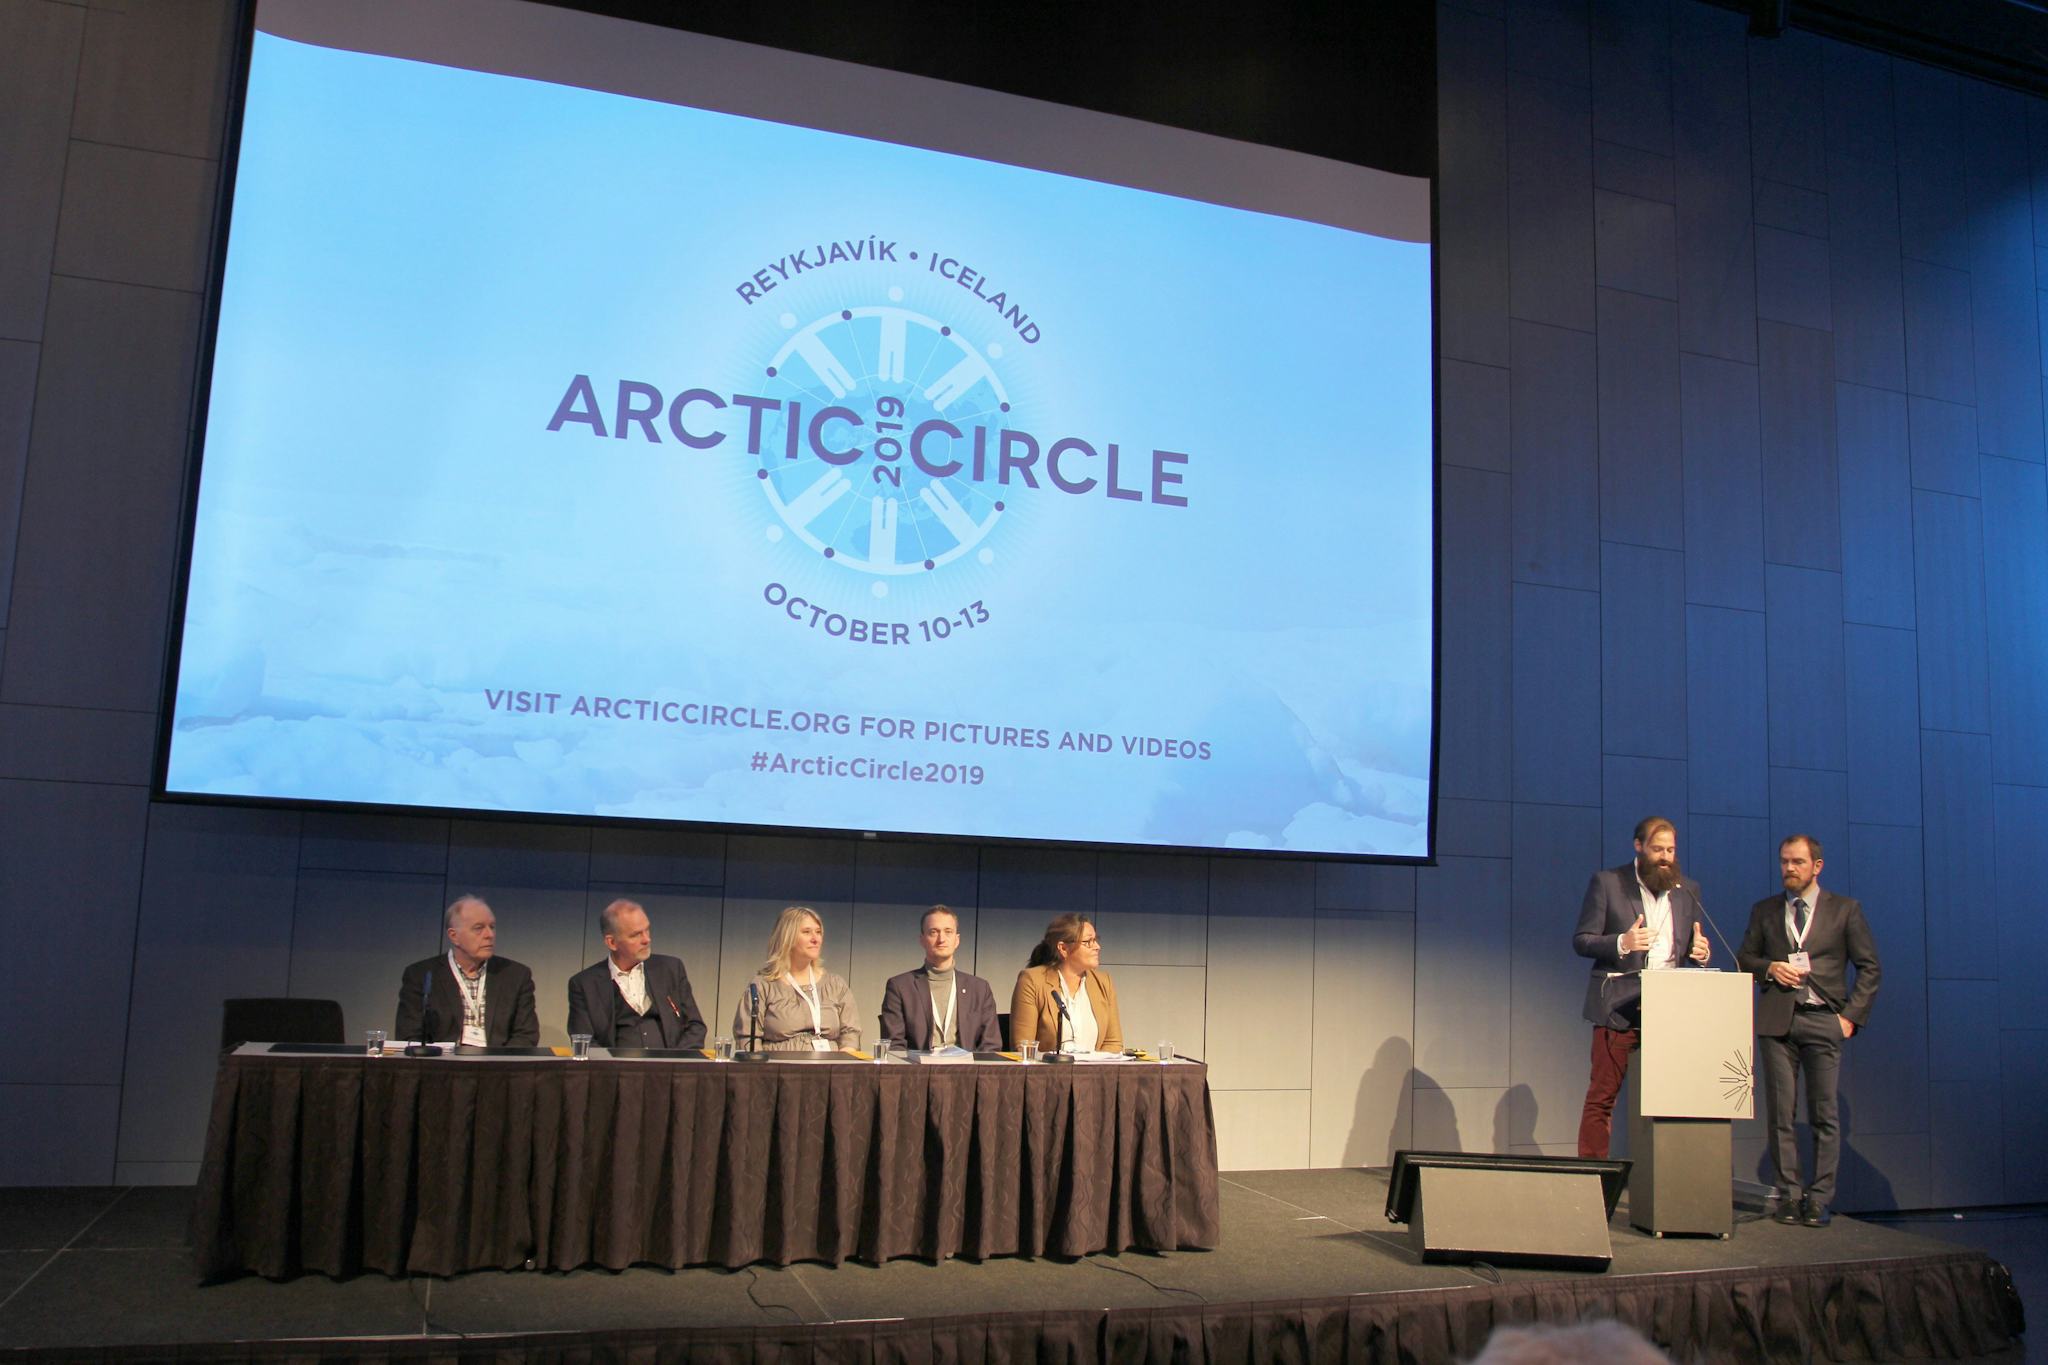 Six individuals seated at a long table and two speakers at a podium, in front of a large screen displaying "ARCTIC CIRCLE"